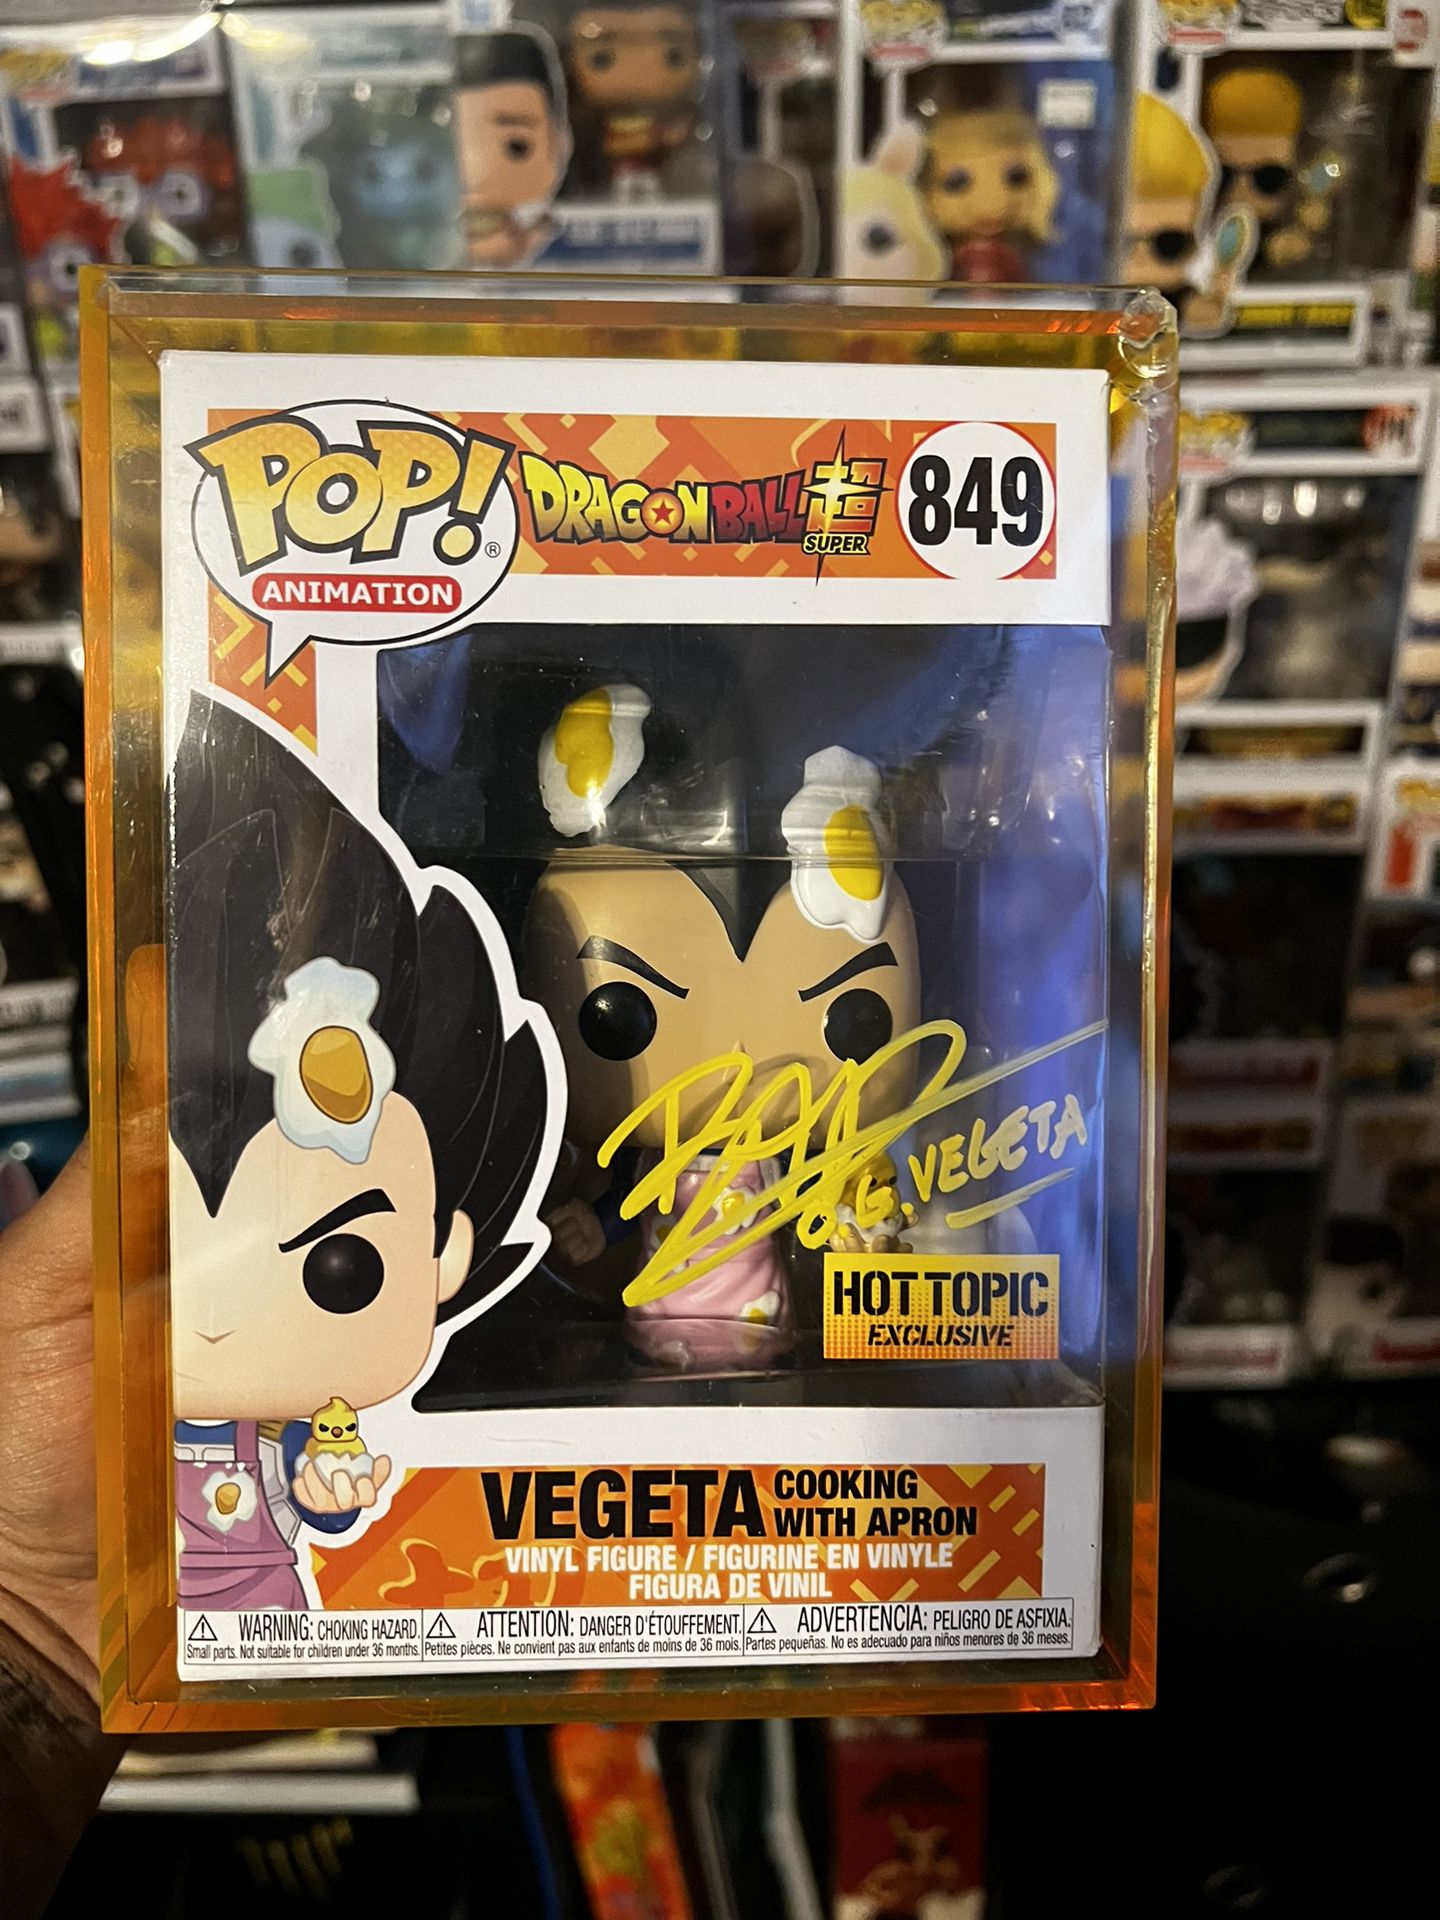 Vegeta signed by Brian Drummond